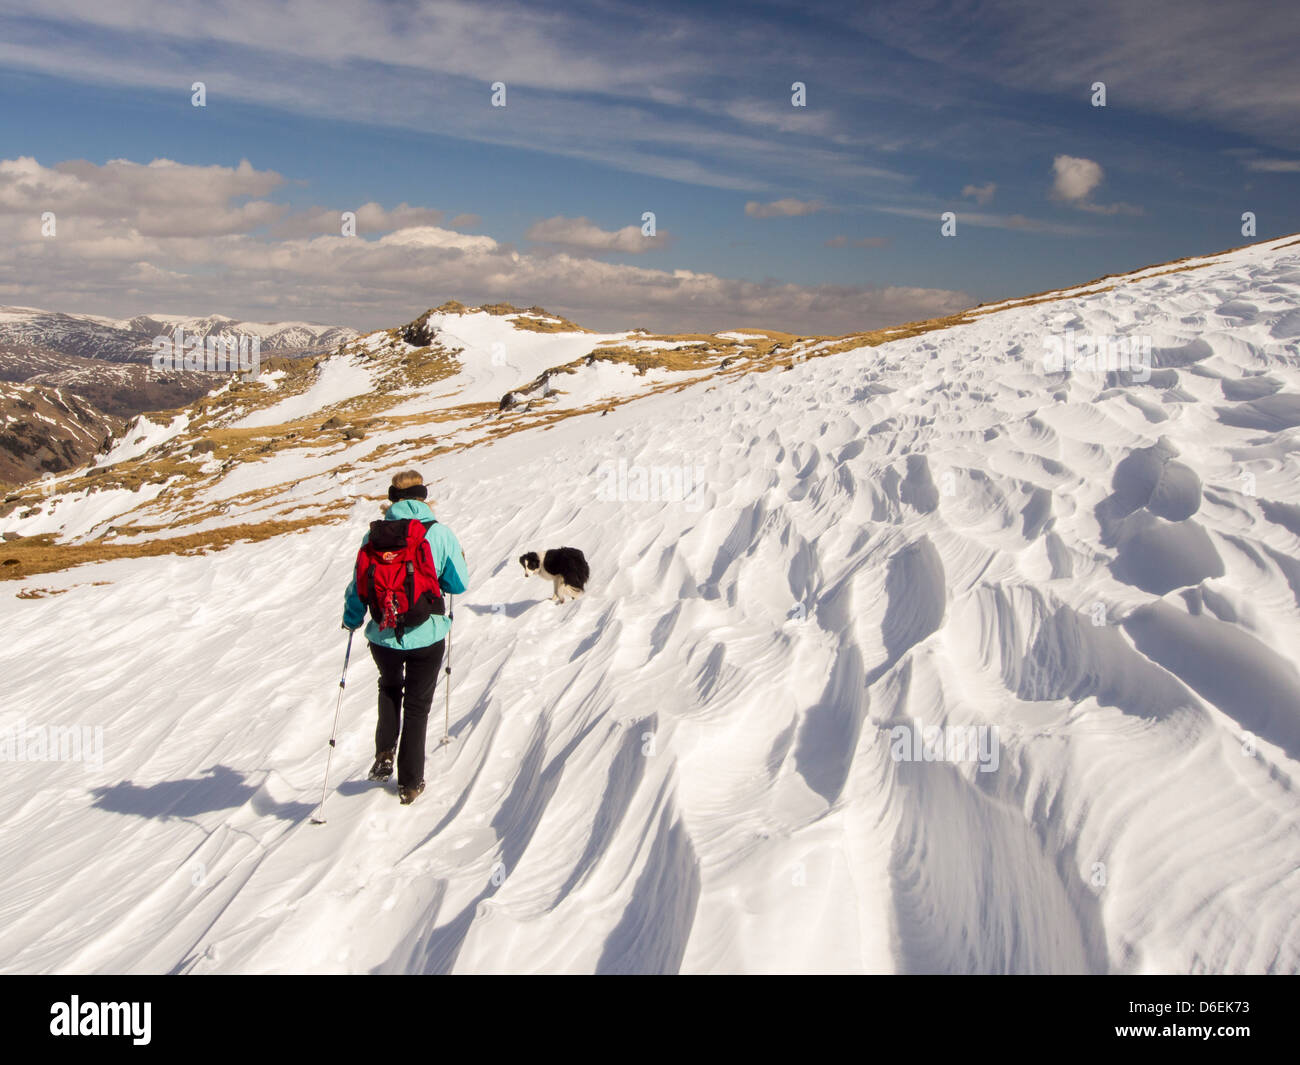 Sastrugi caused by wind scour on the snow pack above Wrynose Pass in the Lake District, UK with a woman walker. Stock Photo